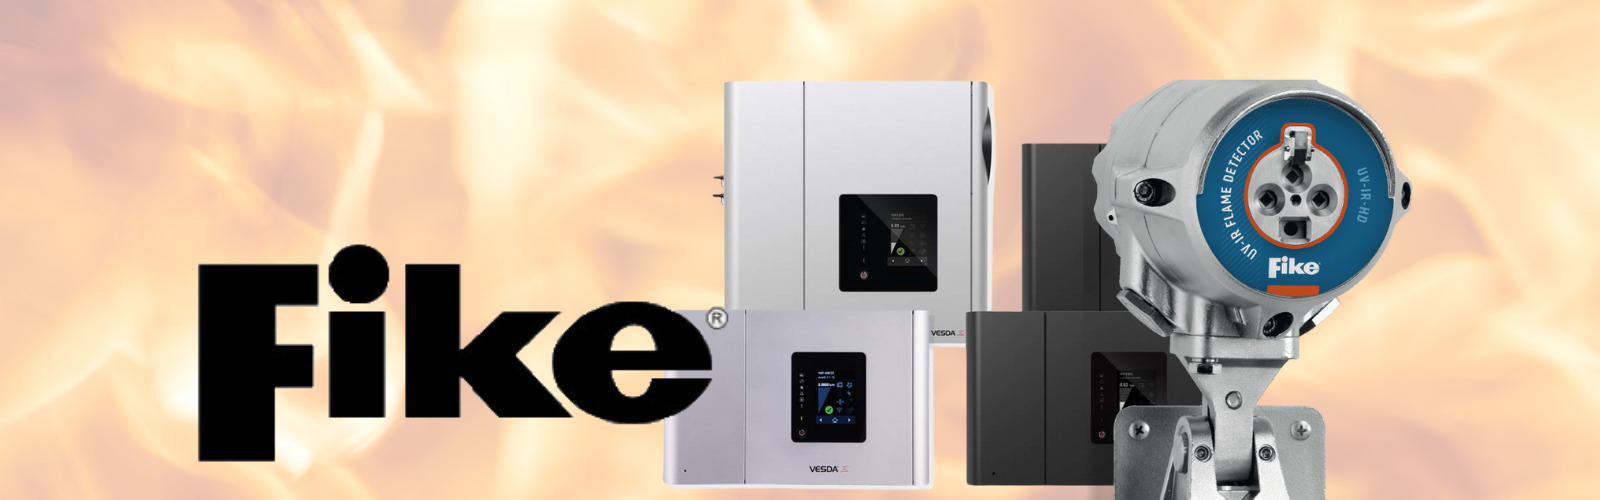 Fike Fire Detection Products & Systems